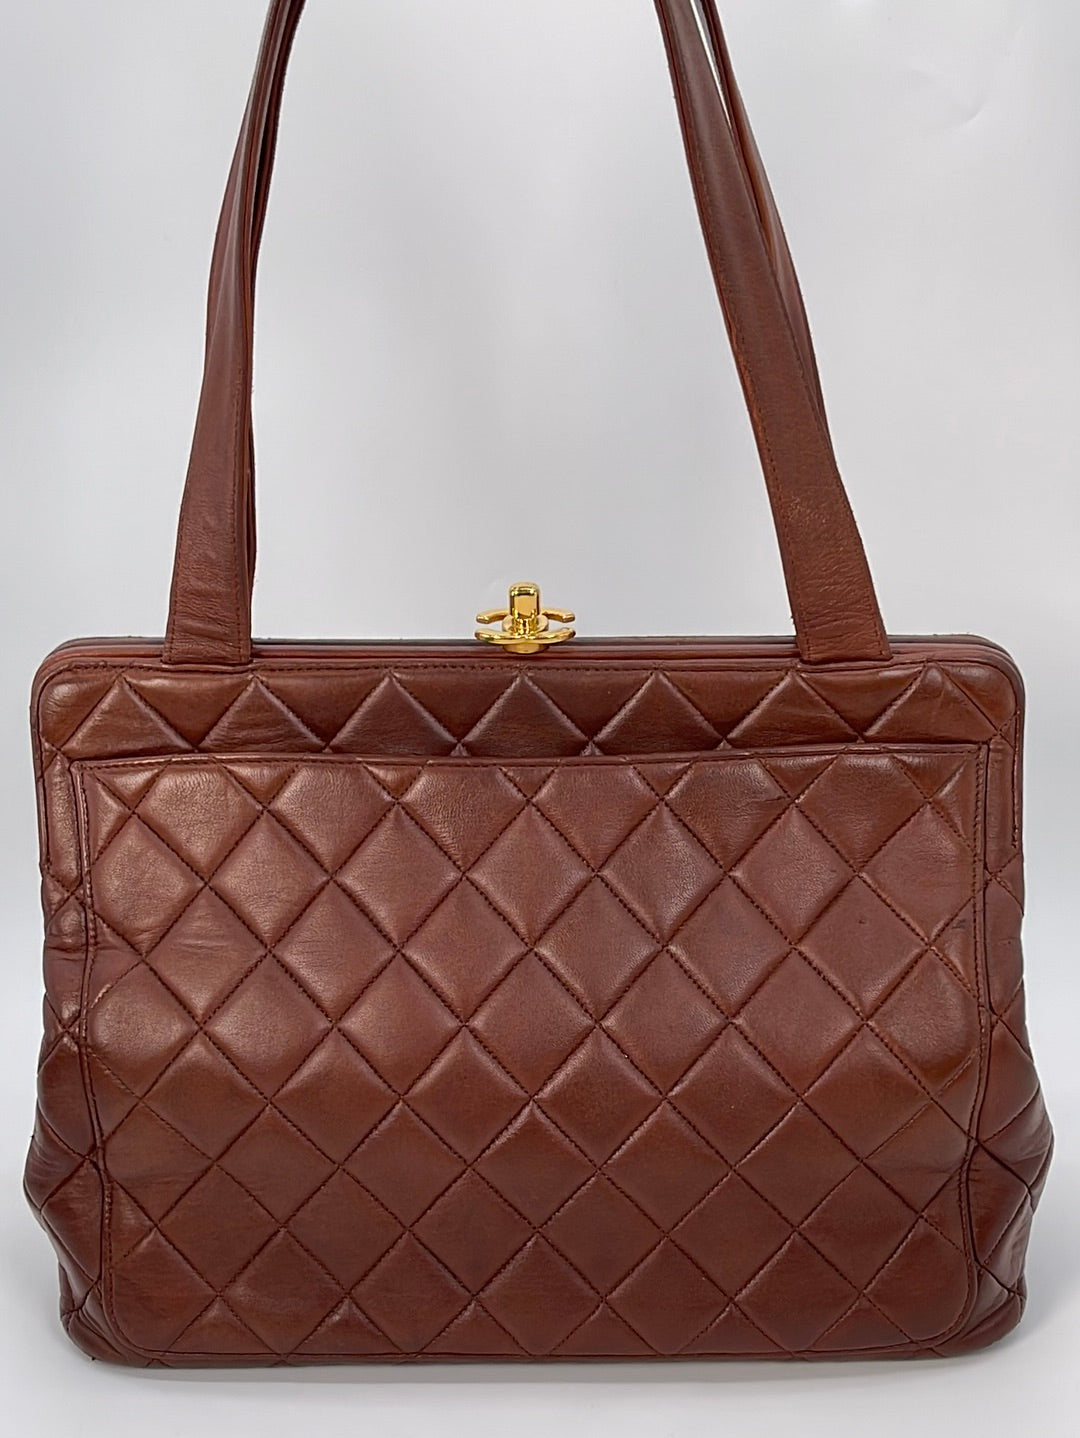 Preloved Chanel Brown Diamond Quilted Lambskin Leather CC Kiss Lock Tote 4392729 022723